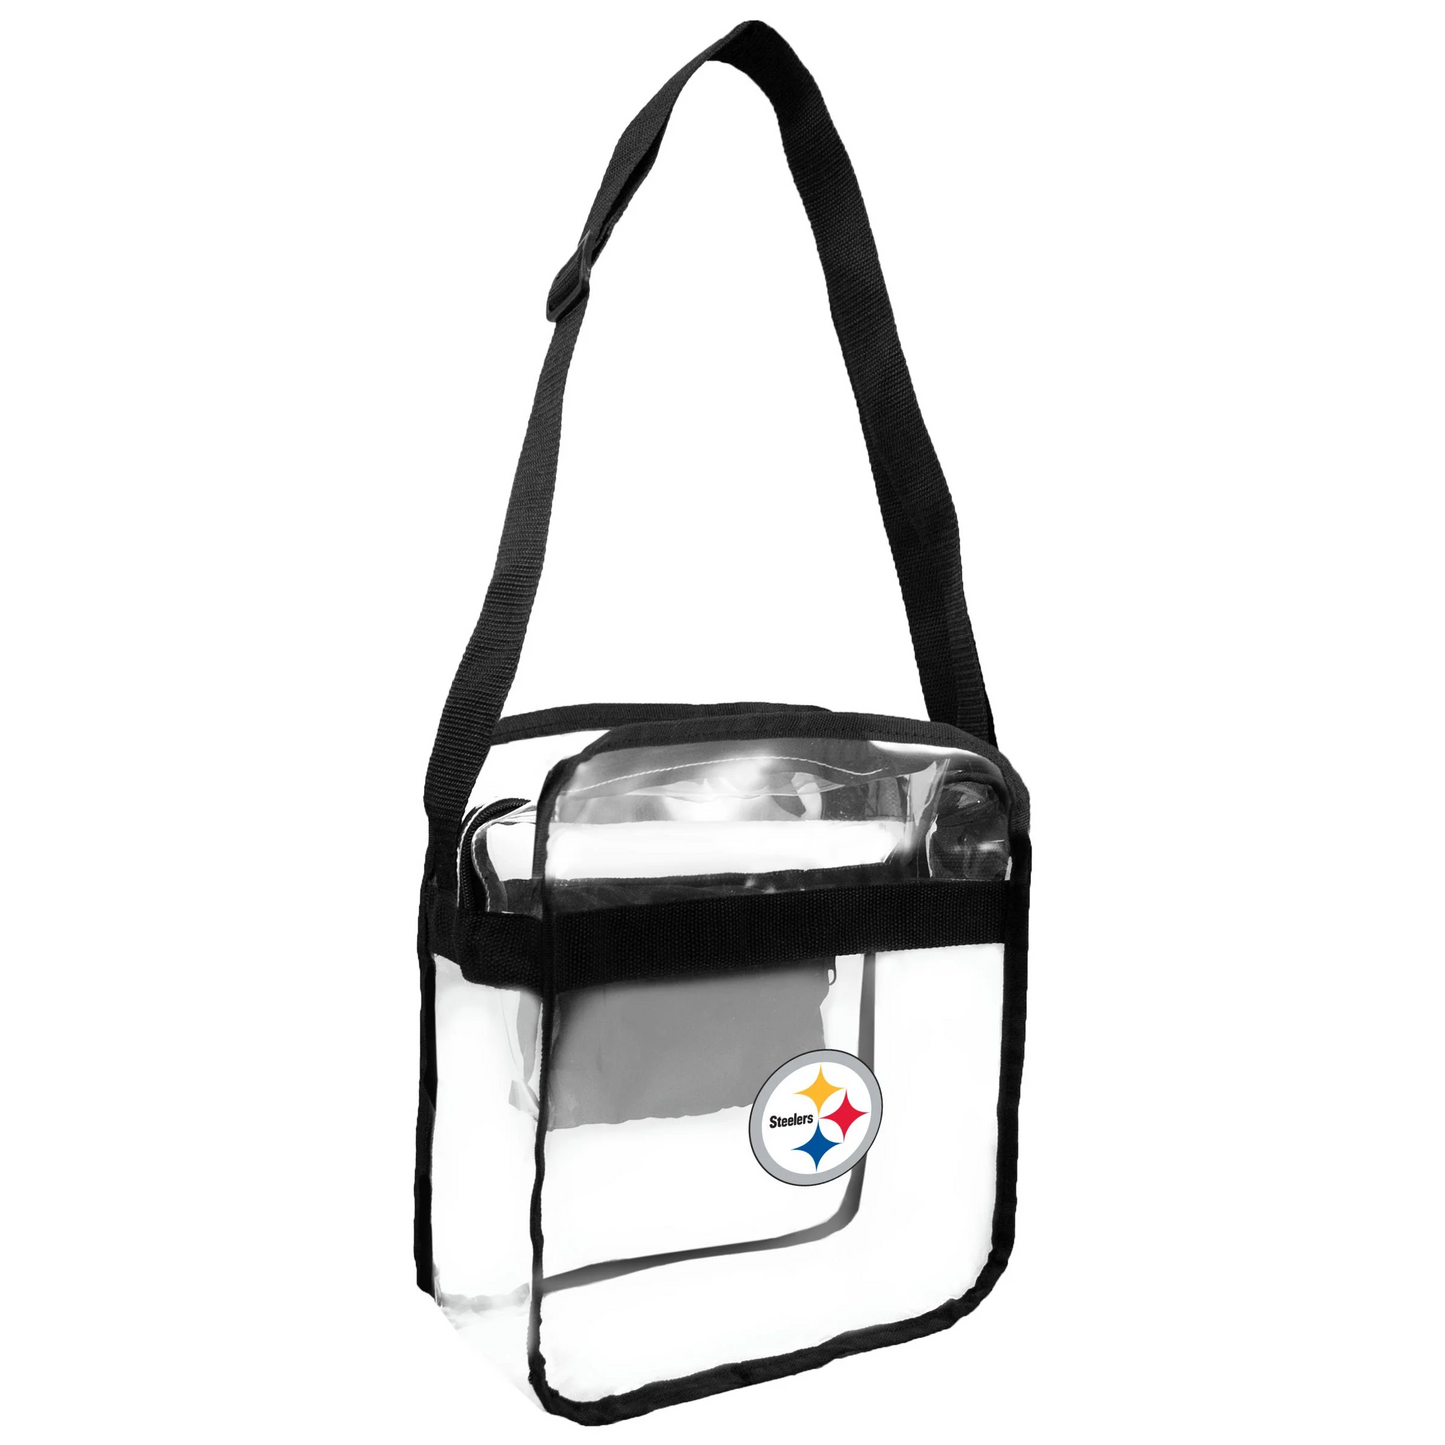 PITTSBURGH STEELERS STADIUM-APPROVED CLEAR CARRYALL CROSSBODY BAG